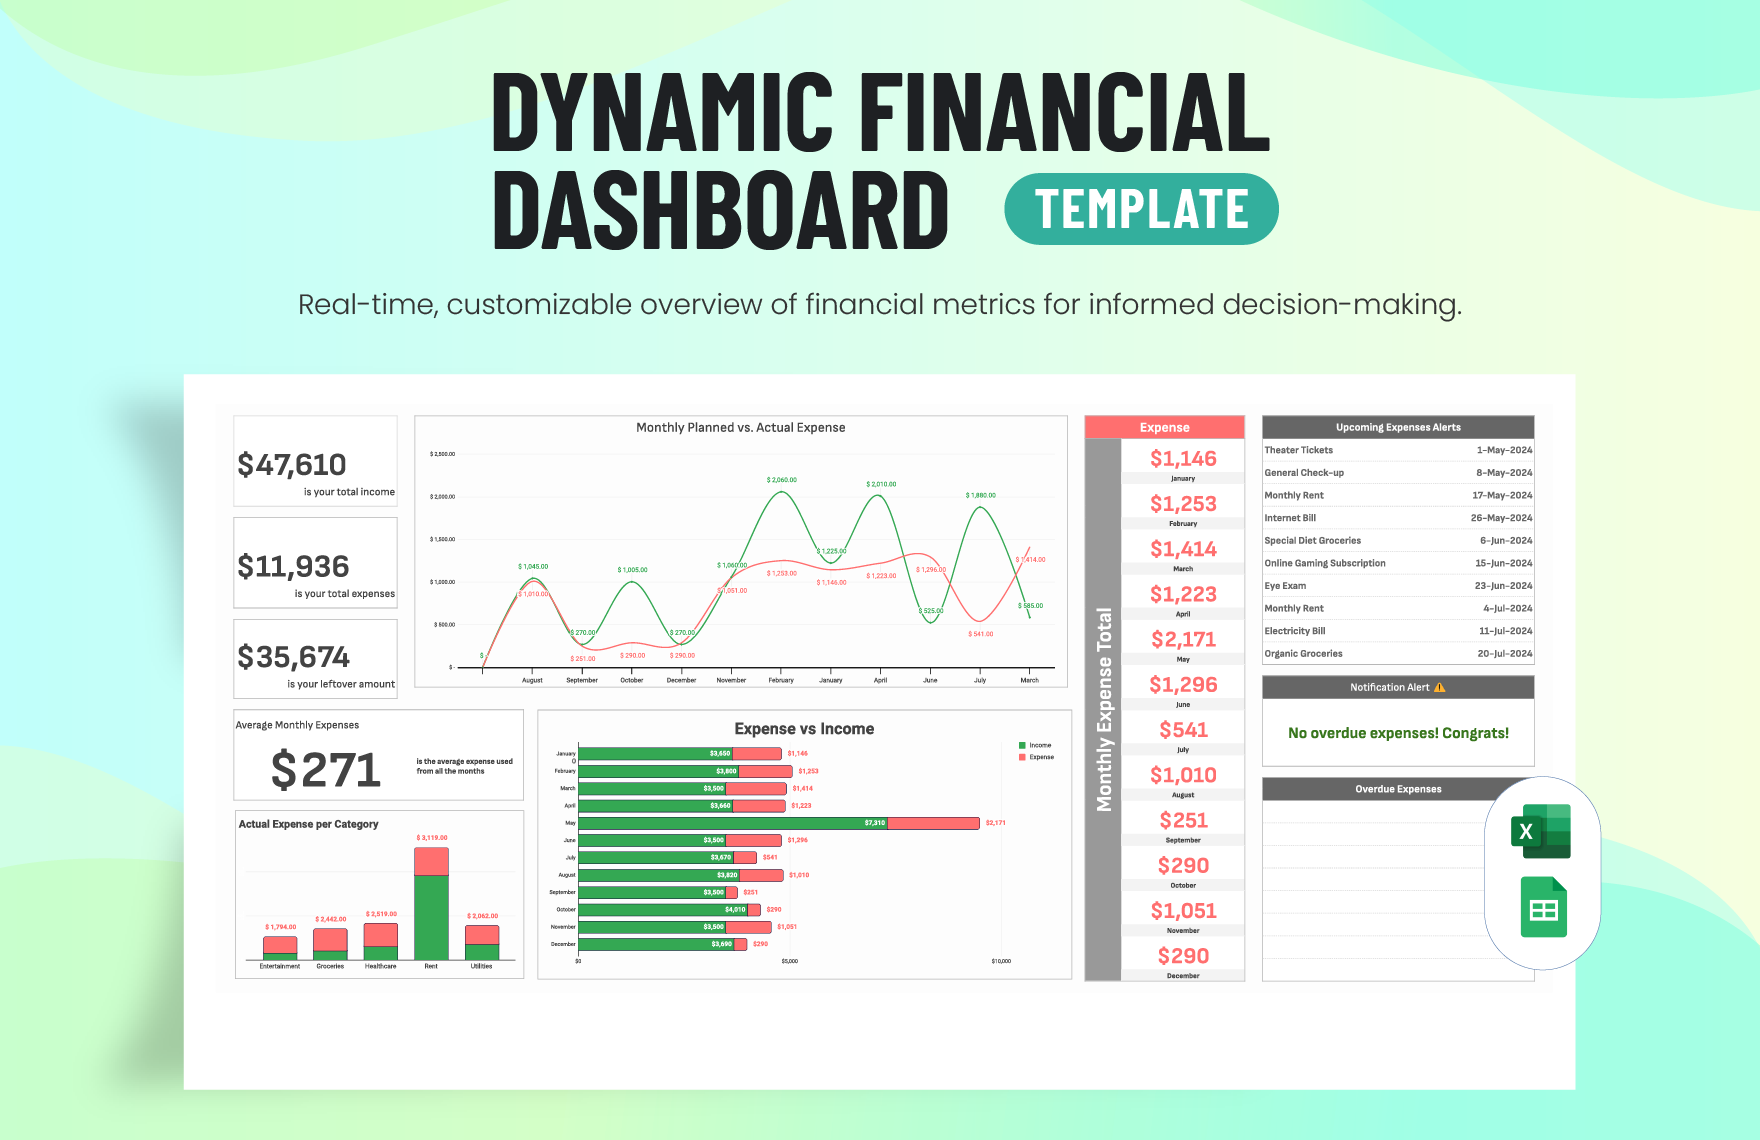 Dynamic Financial Dashboard Template in Excel, Google Sheets, PSD